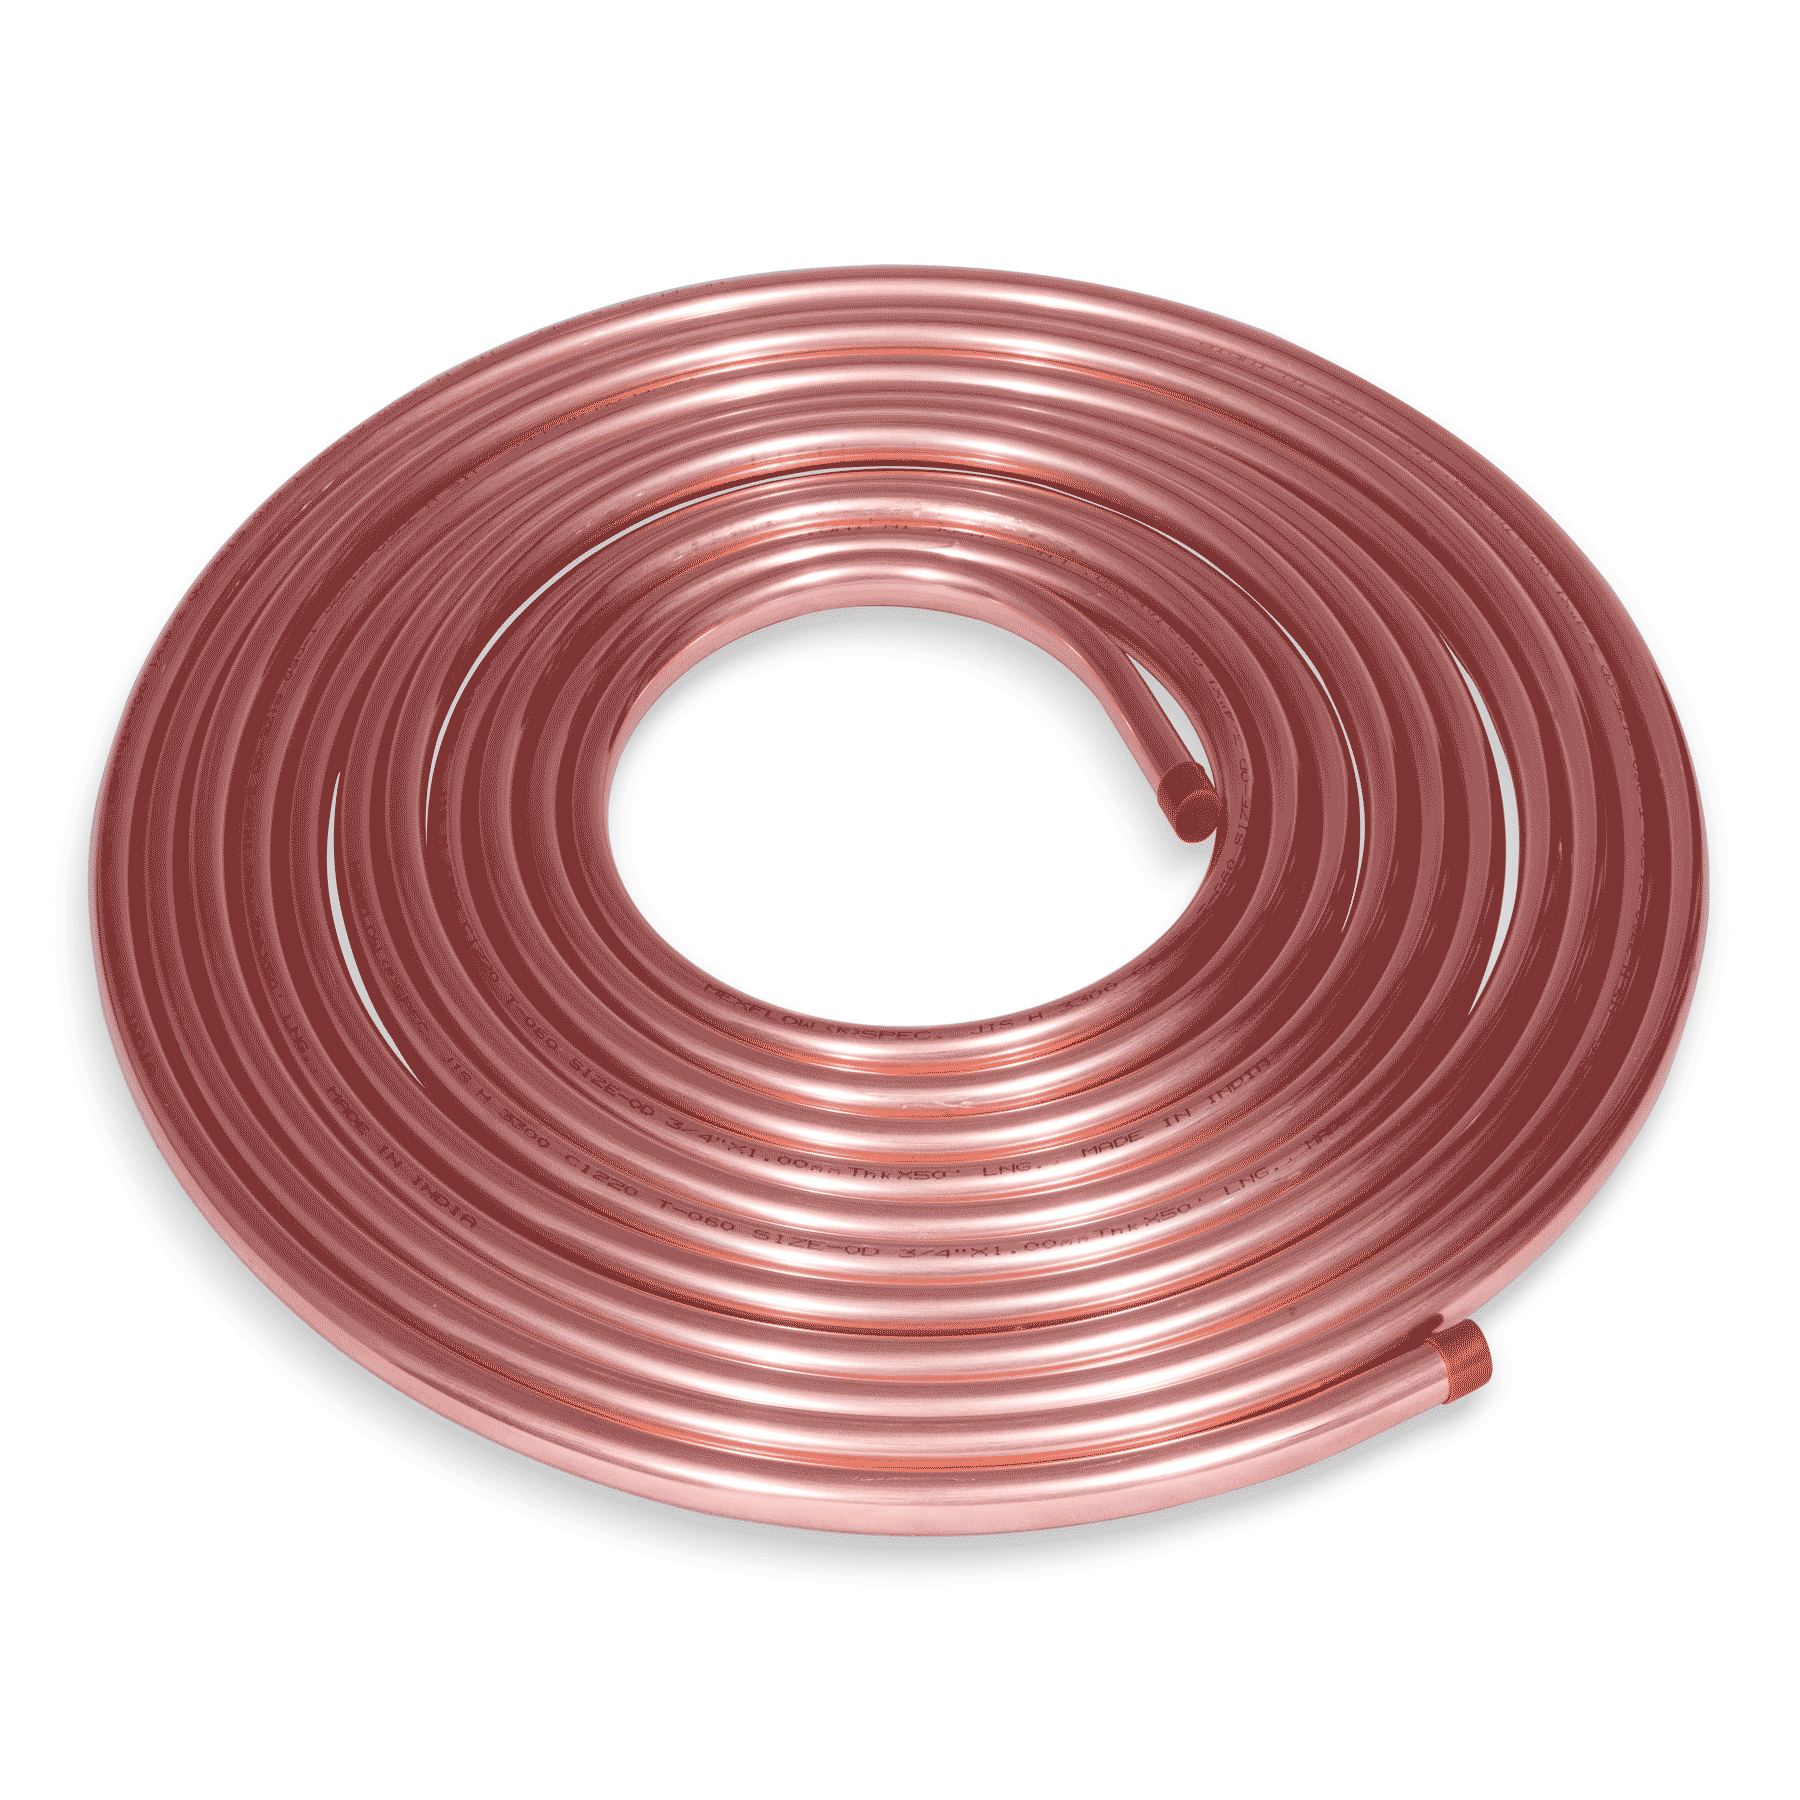 Mexflow Bare Copper Tubes (for Instrumentation or Stream Tracing)